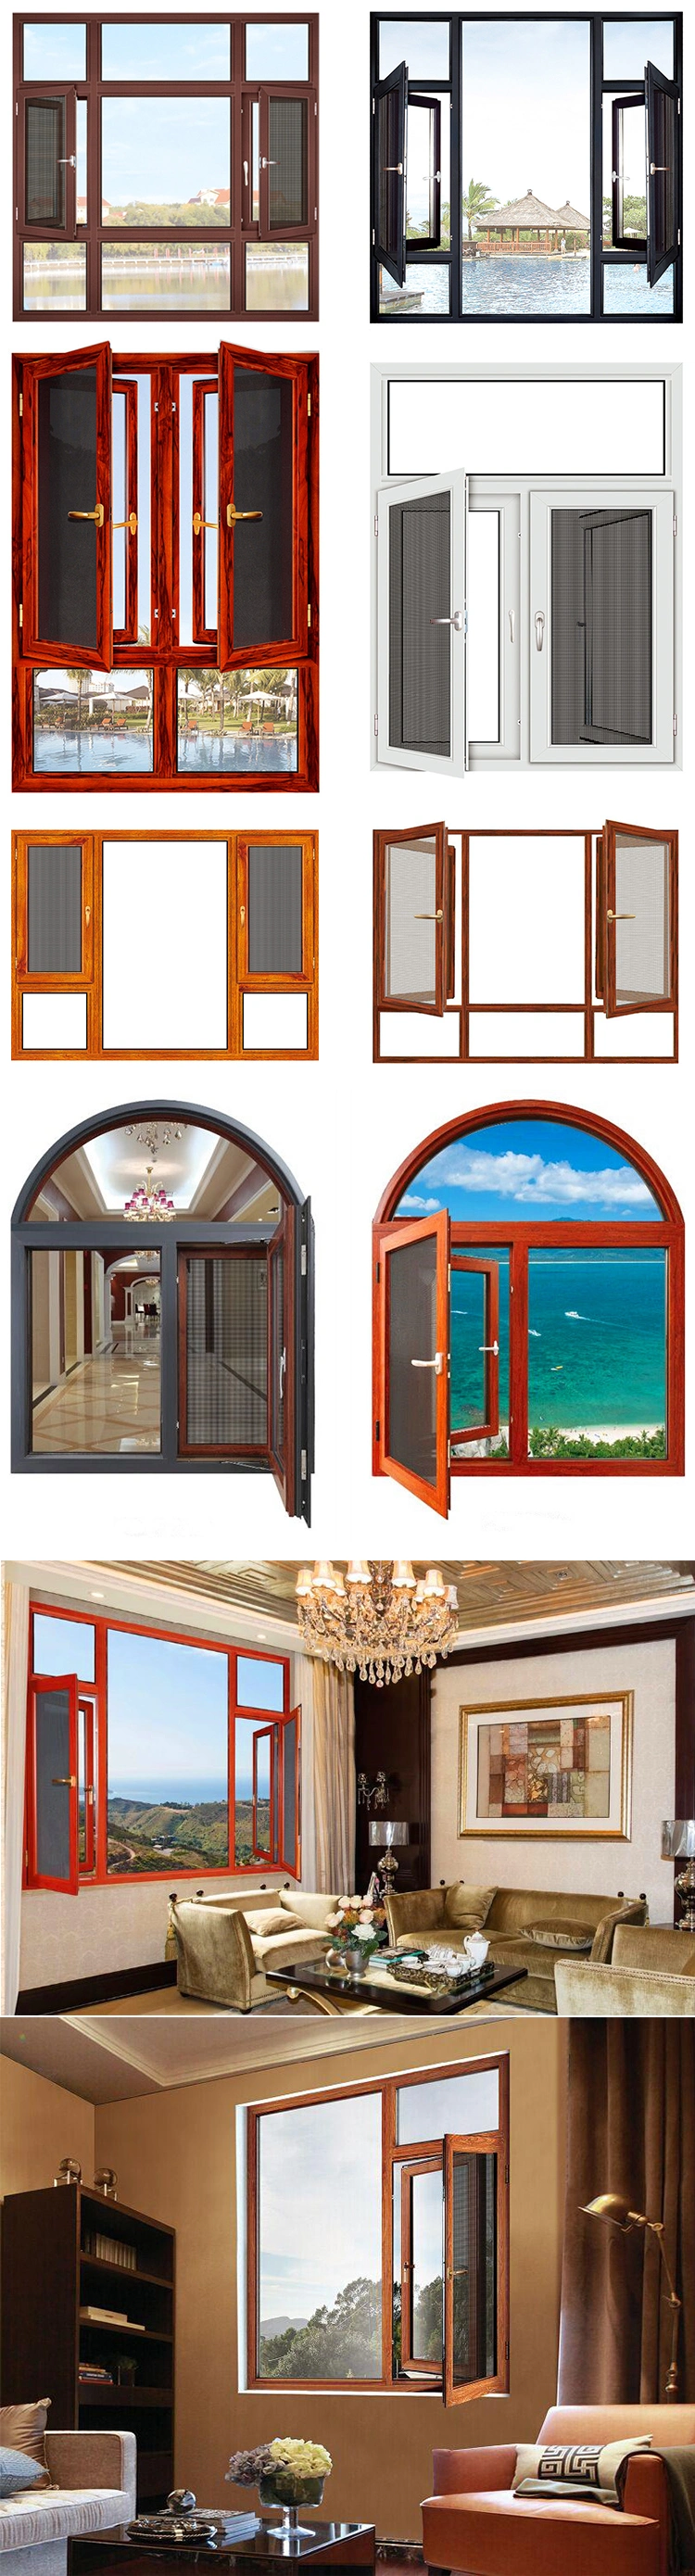 Wind Resistance Wind-Proof UPVC Windows and Doors PVC safety Windows Building Material Blinds for Windows Building Construction PVC Door UPVC Casement Window